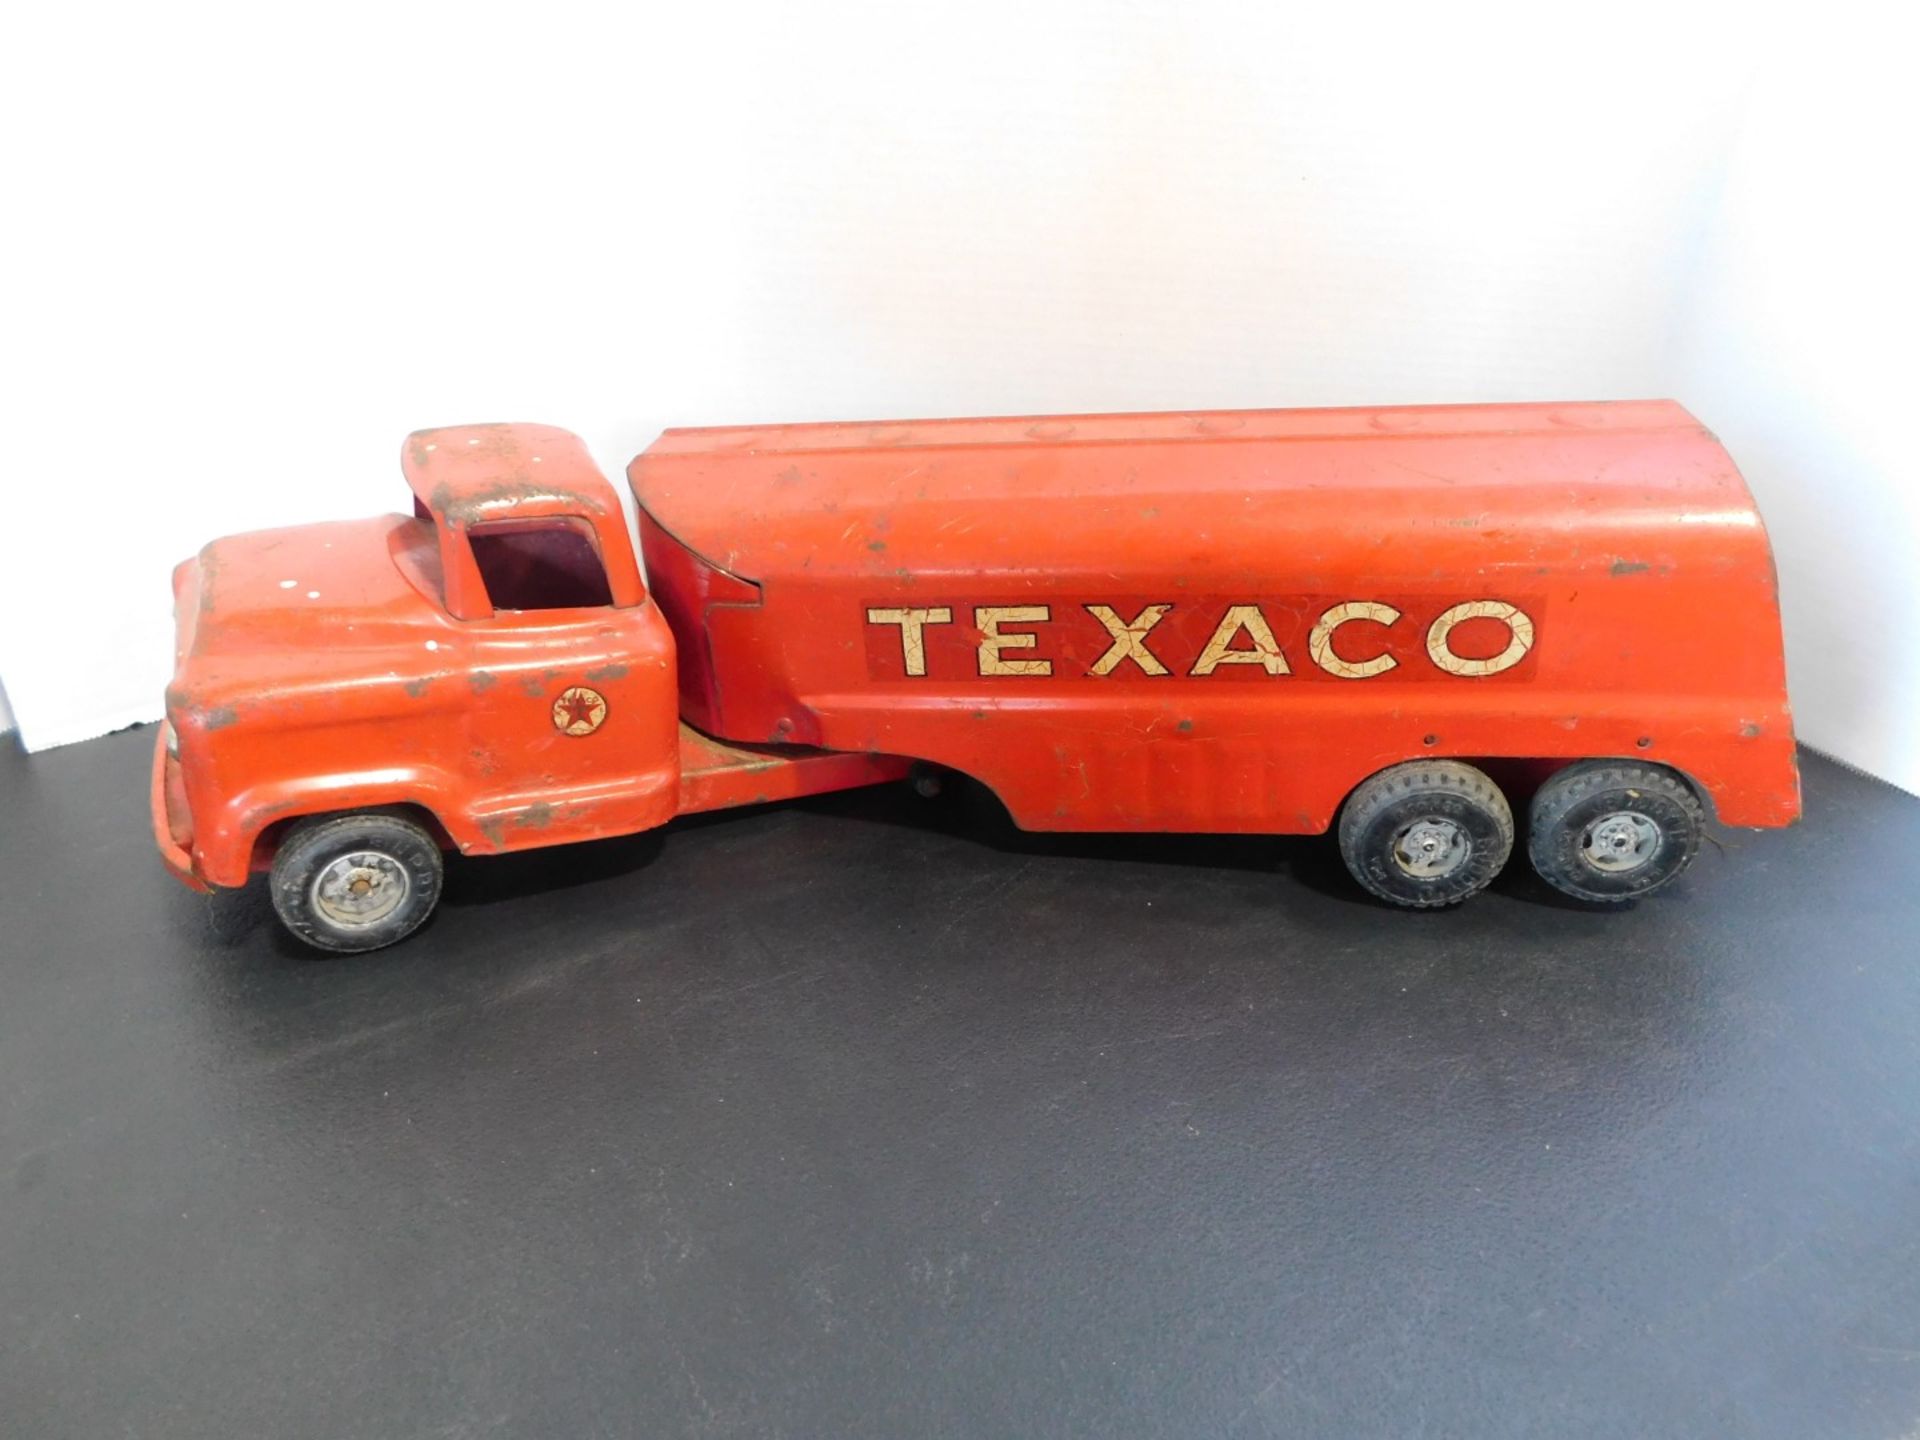 Texaco Truck and Tanker Metal Toy